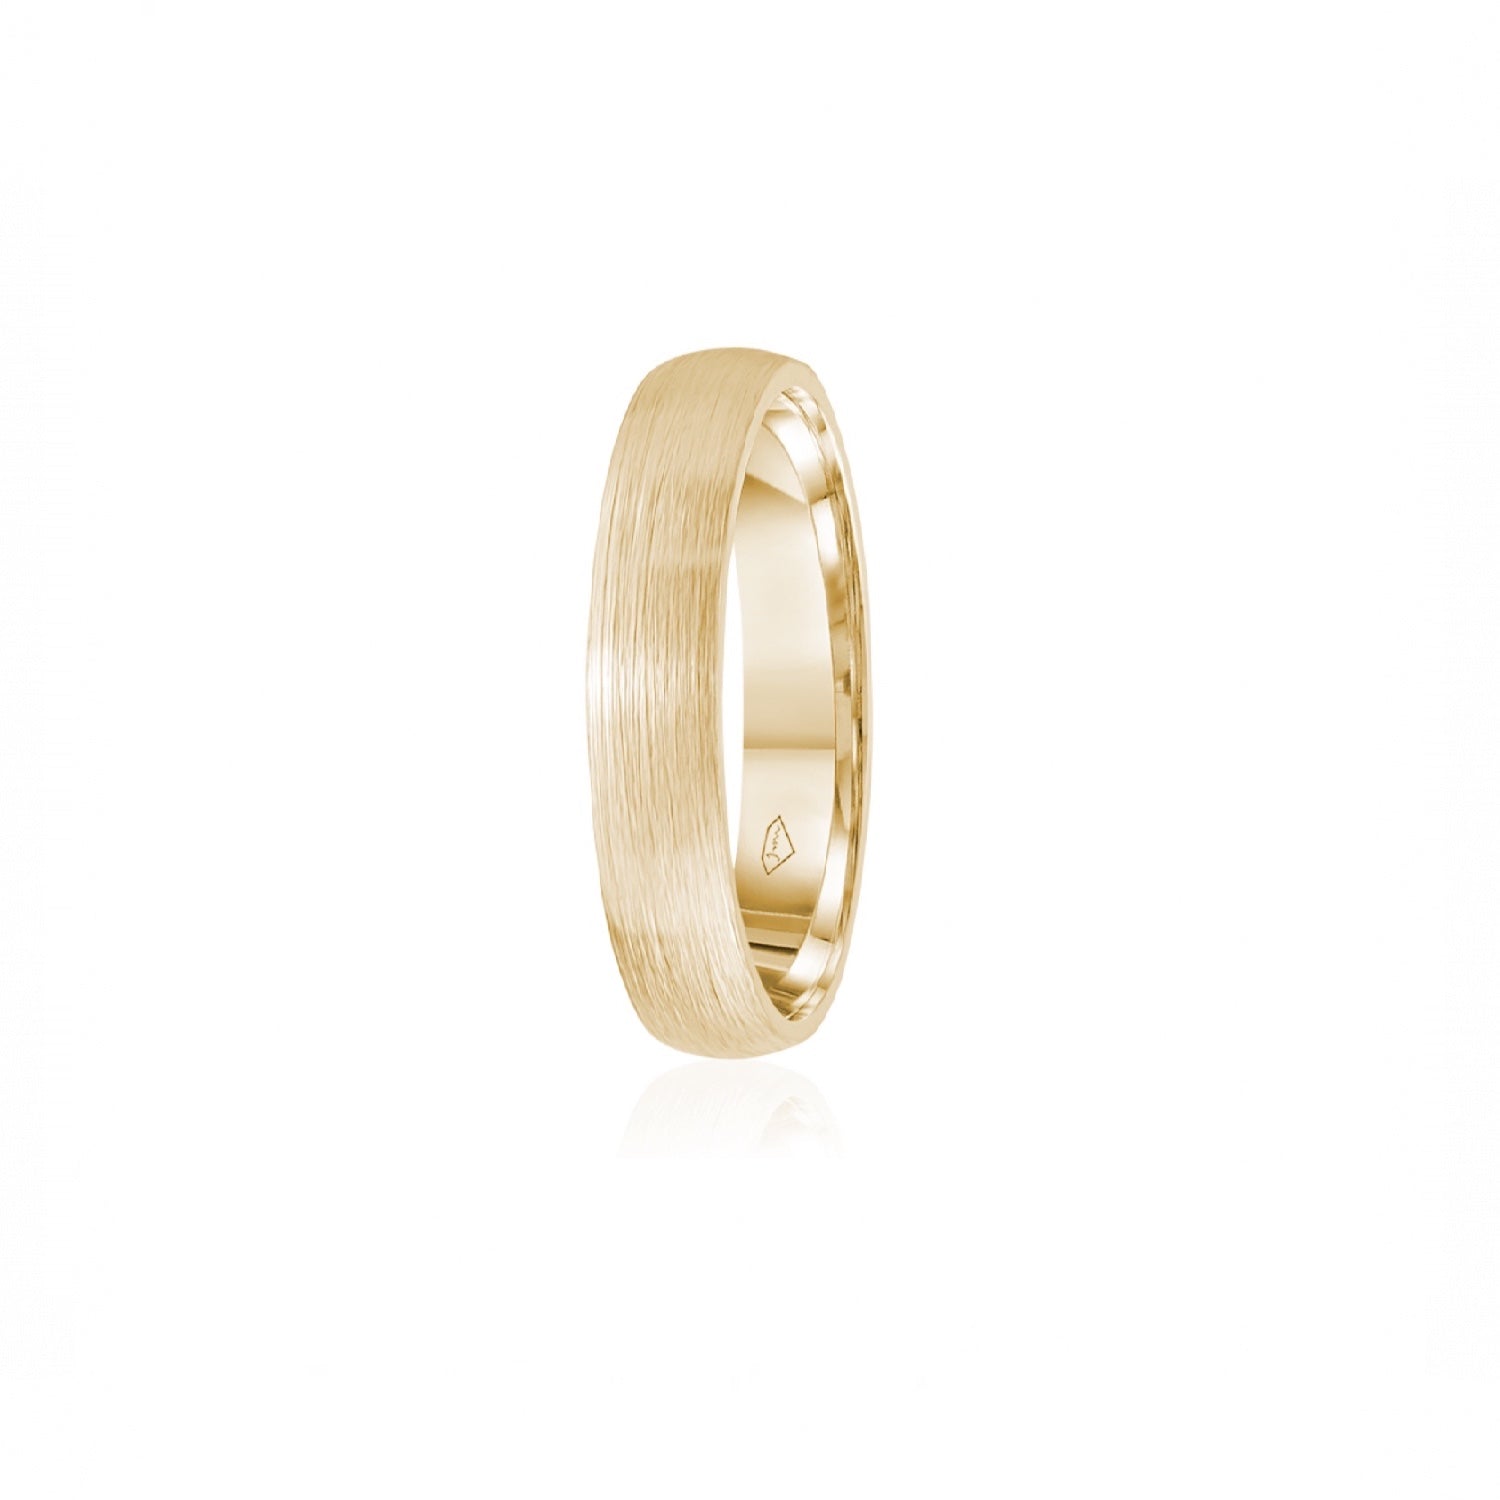 Brushed Finish Comfort Fit 4-5 mm Wedding Band in Yellow Gold